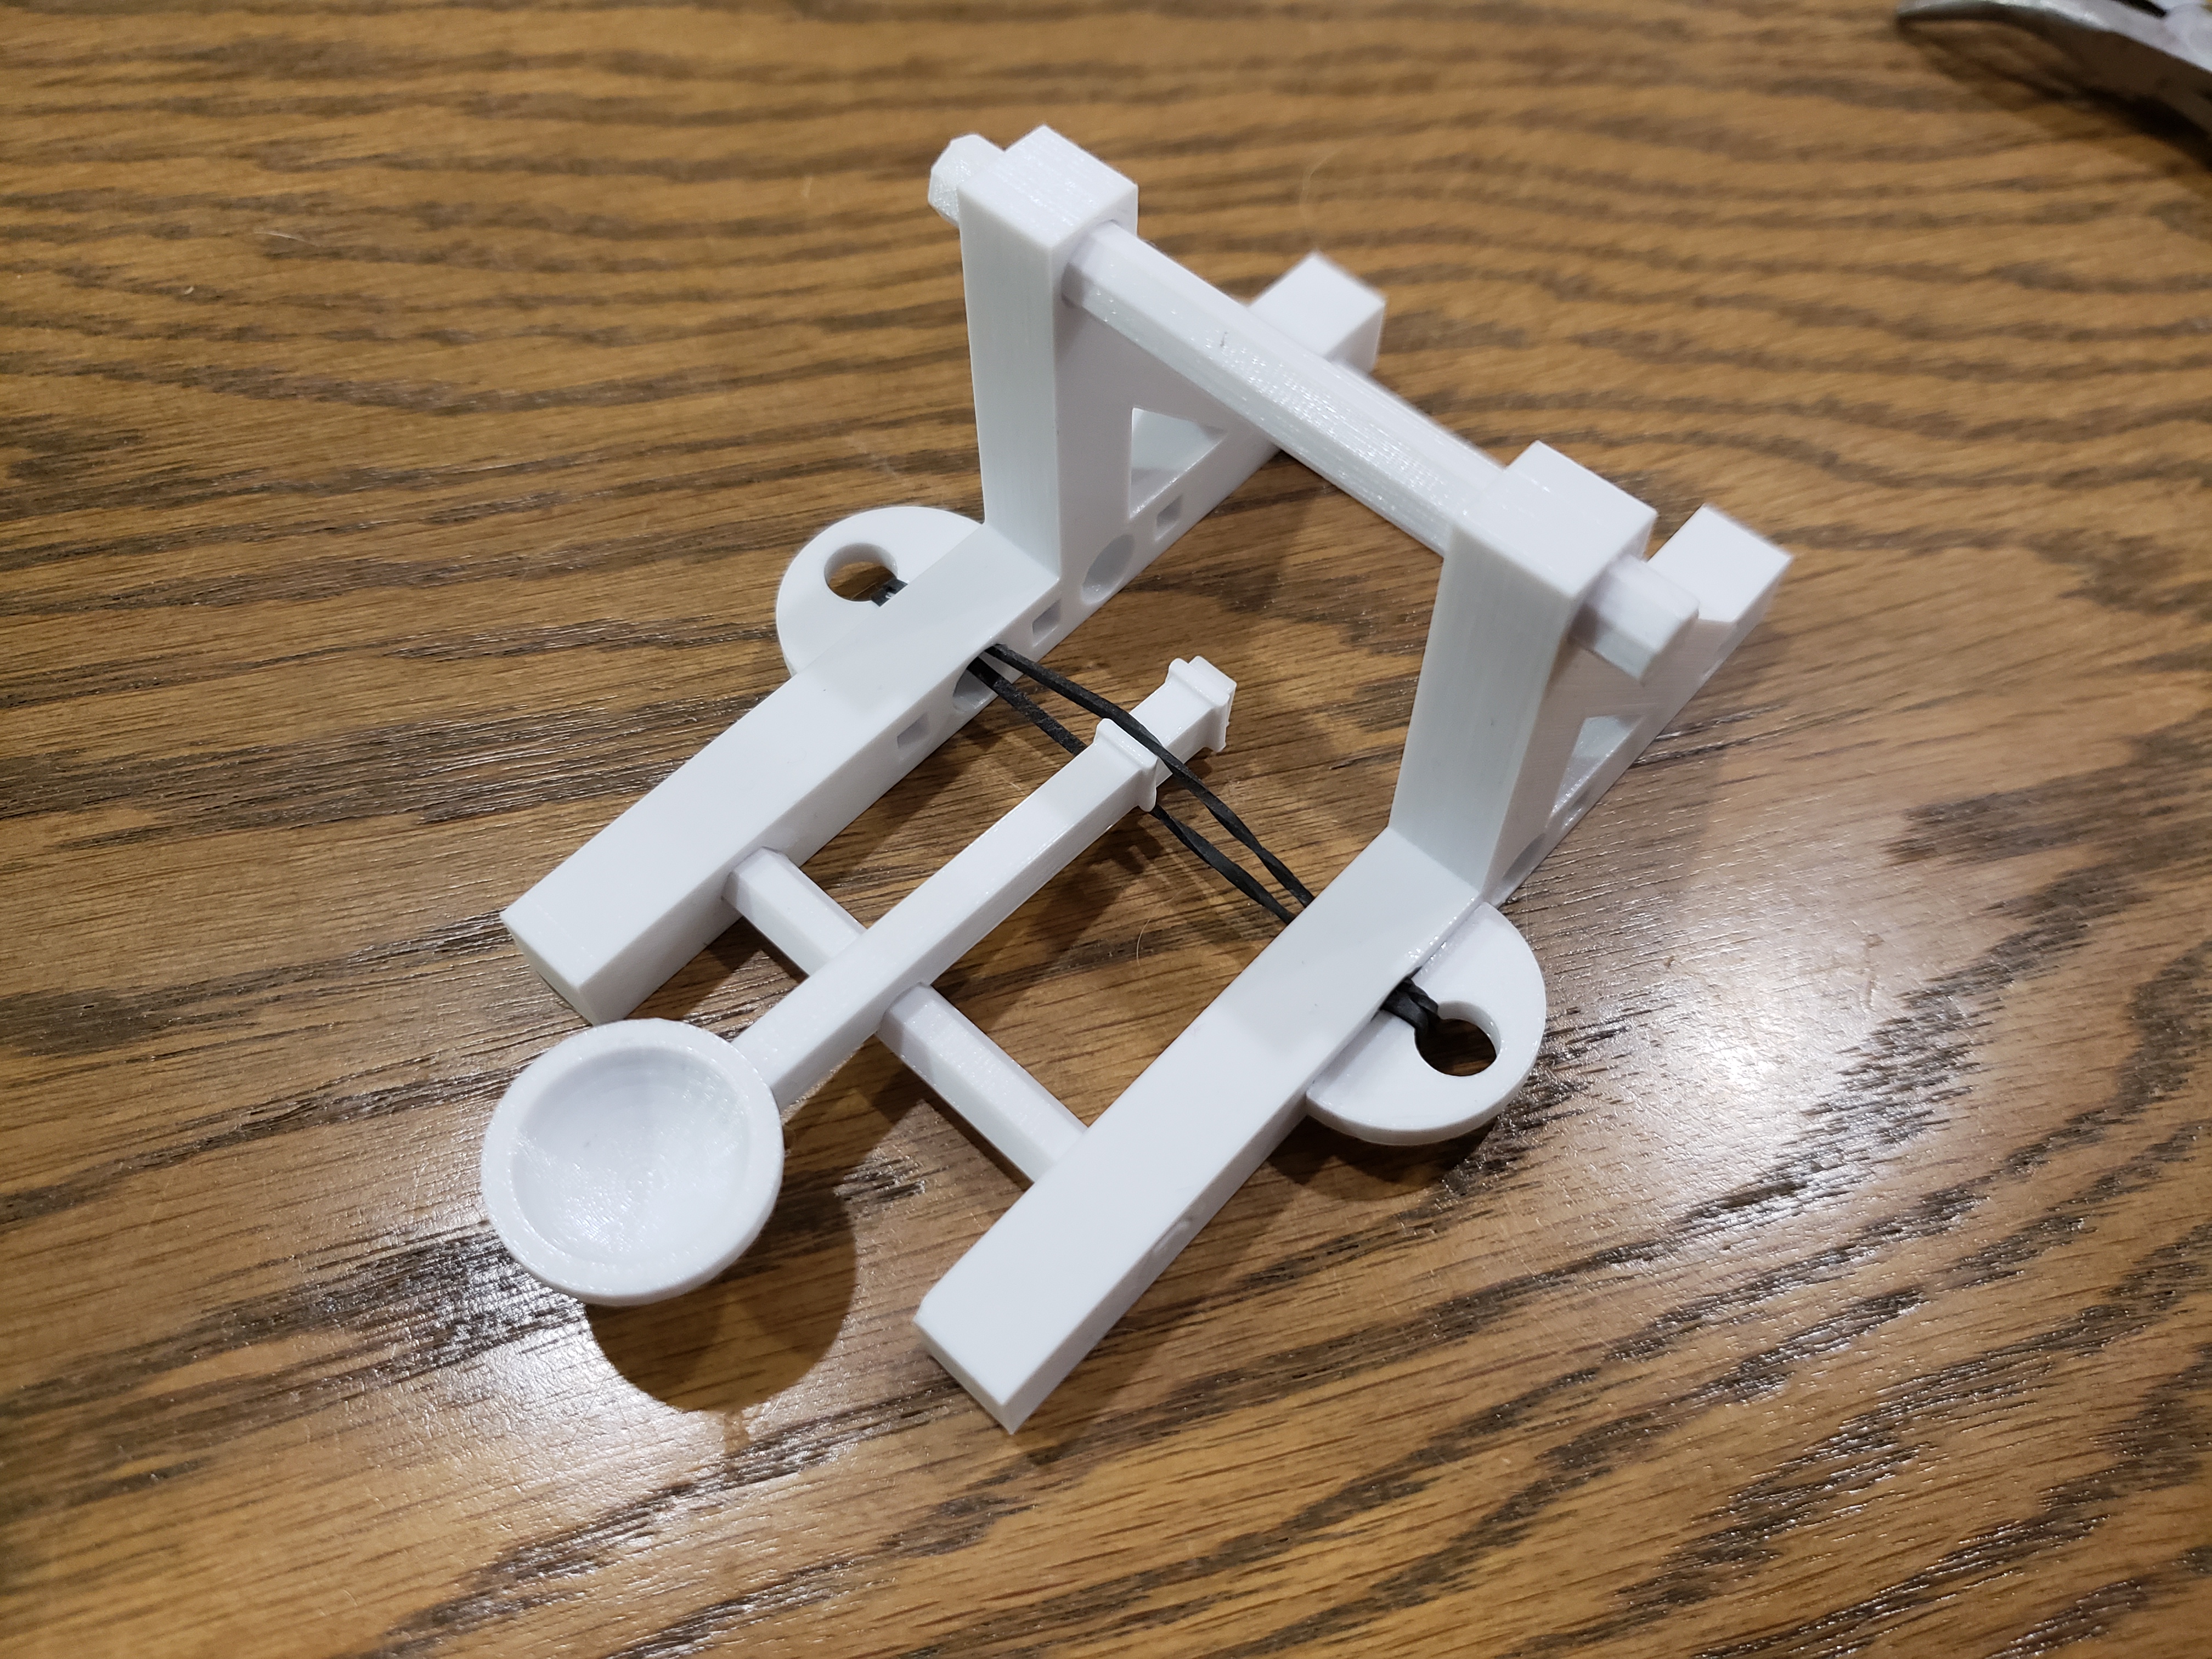 Finished Catapult